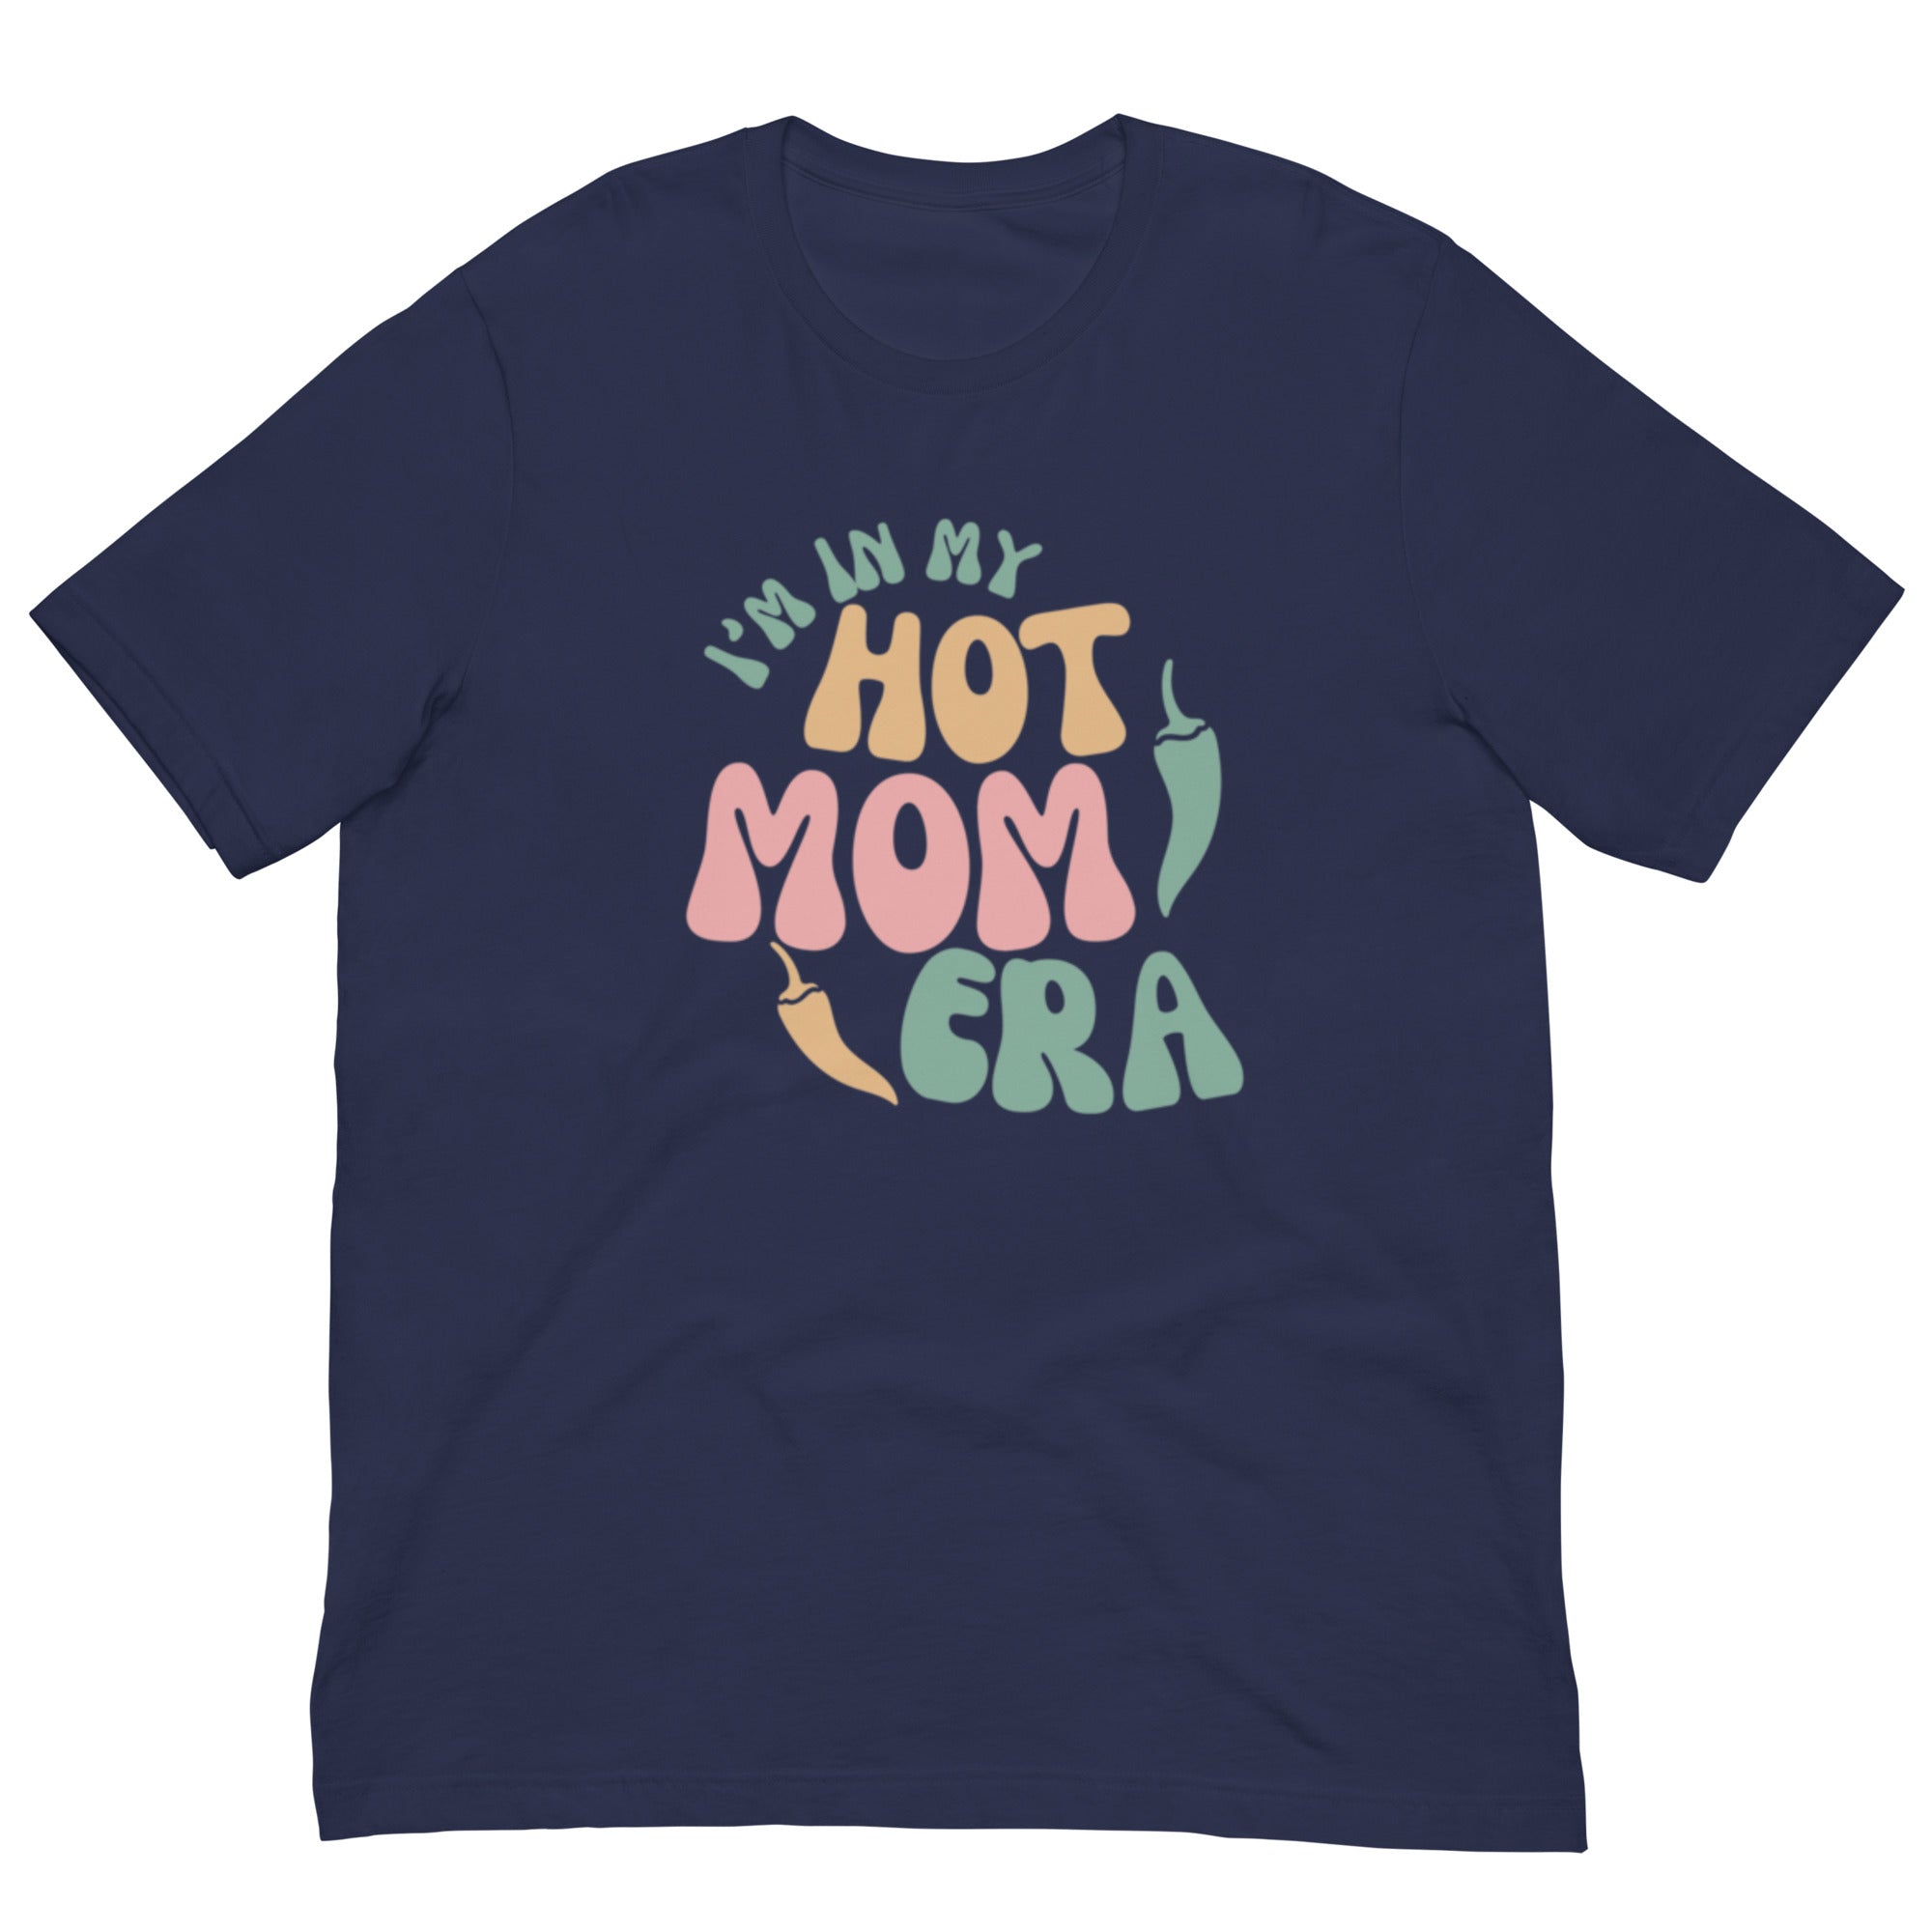 Navy blue breathable Era Shirt with pastel-colored text that reads "in my hot mom era." The text is styled in a fun and casual font.